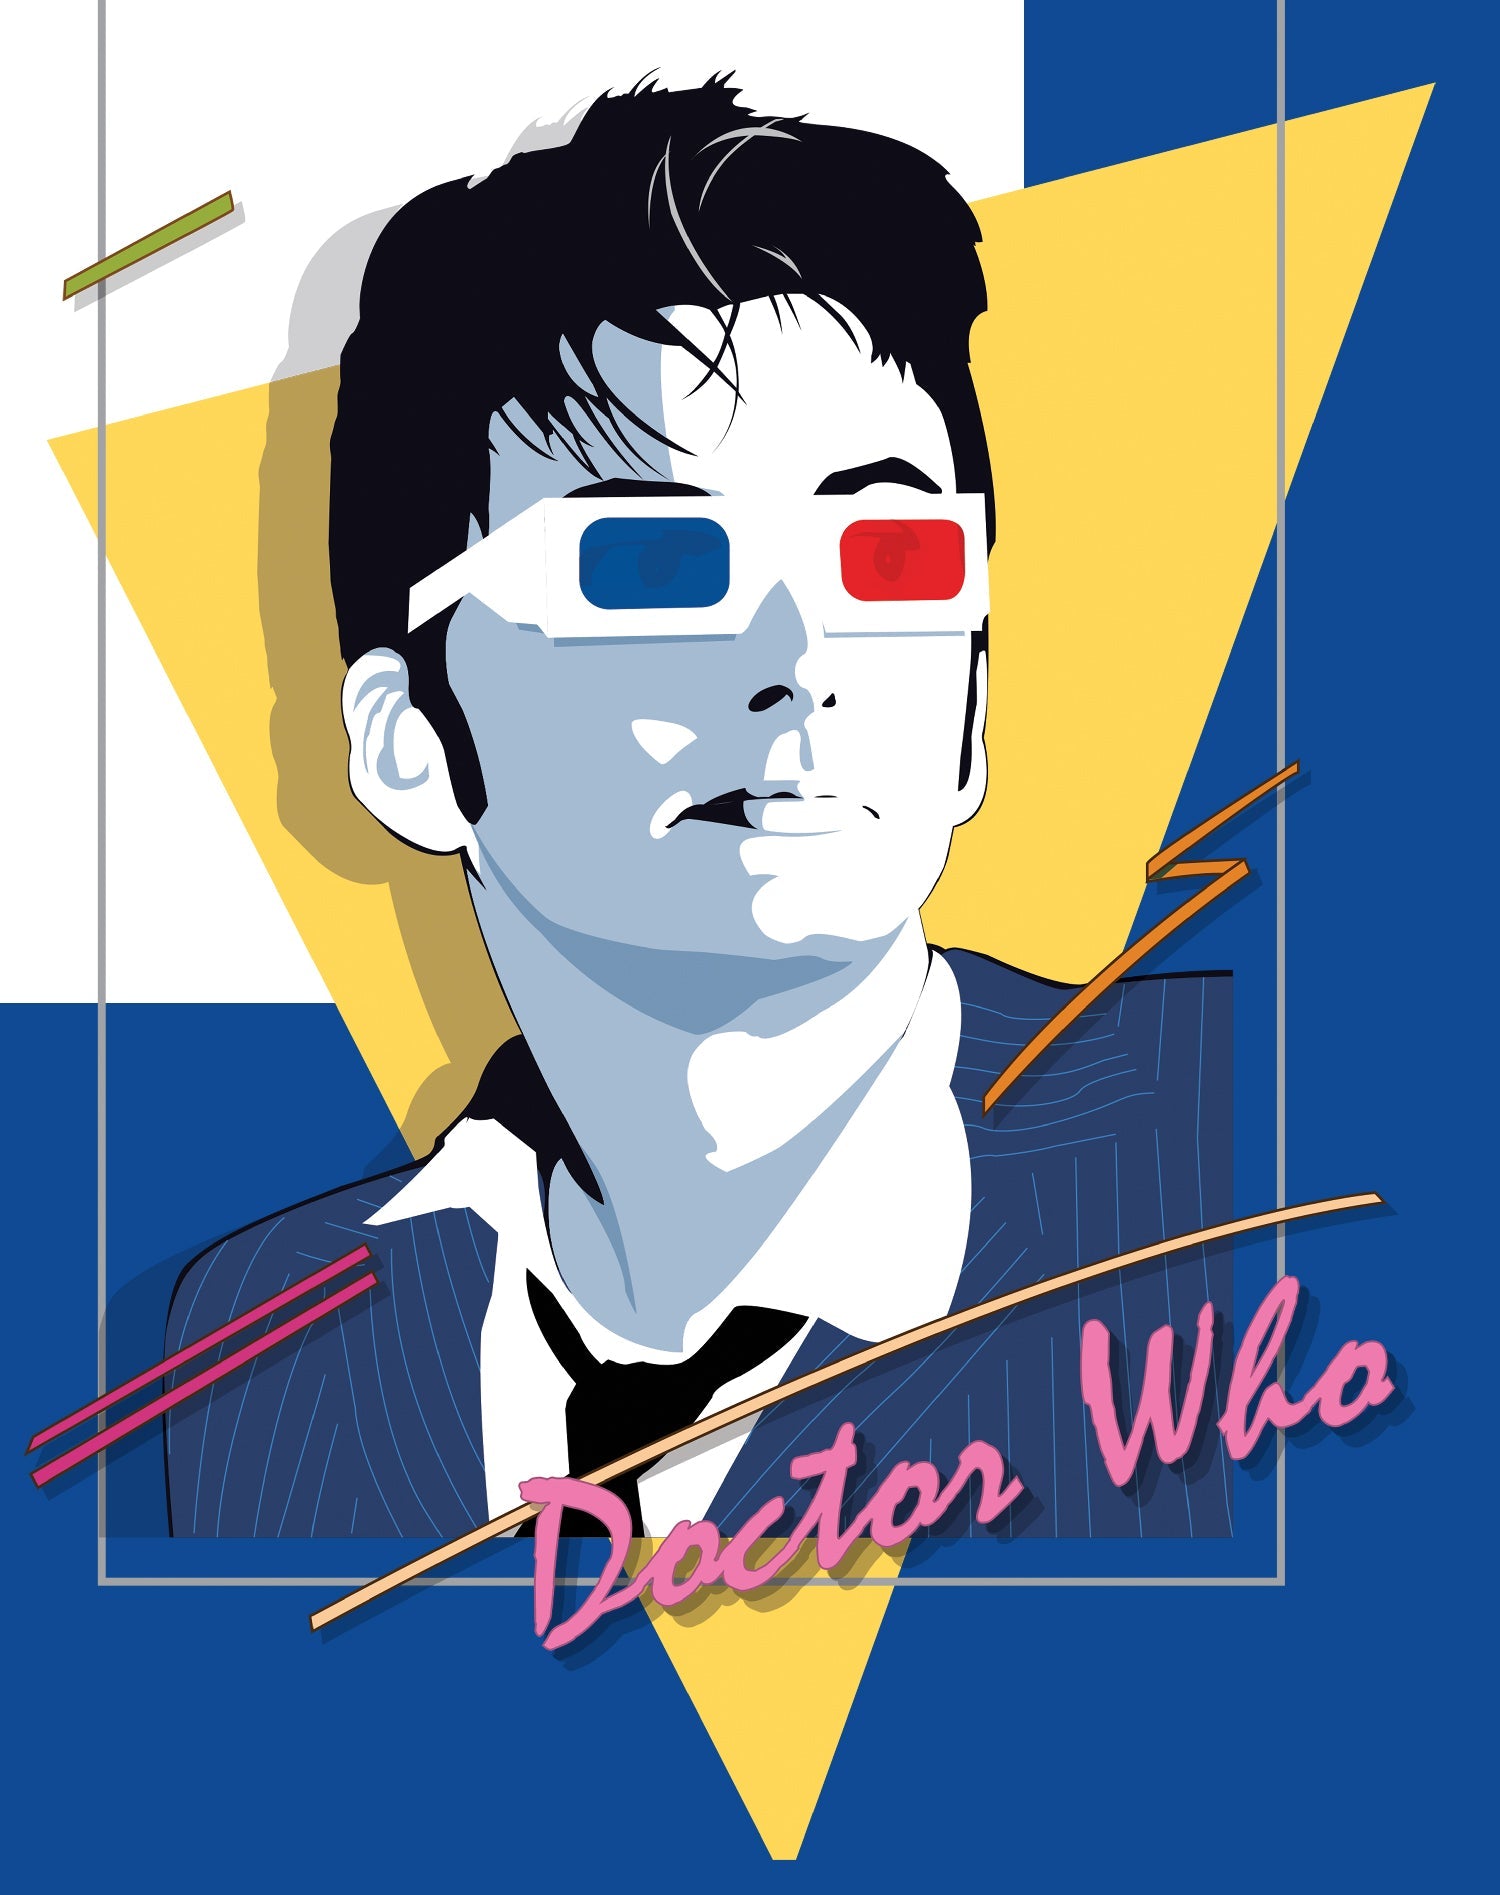 Doctor Who 80s Tenant Nagel Official Women's T-shirt